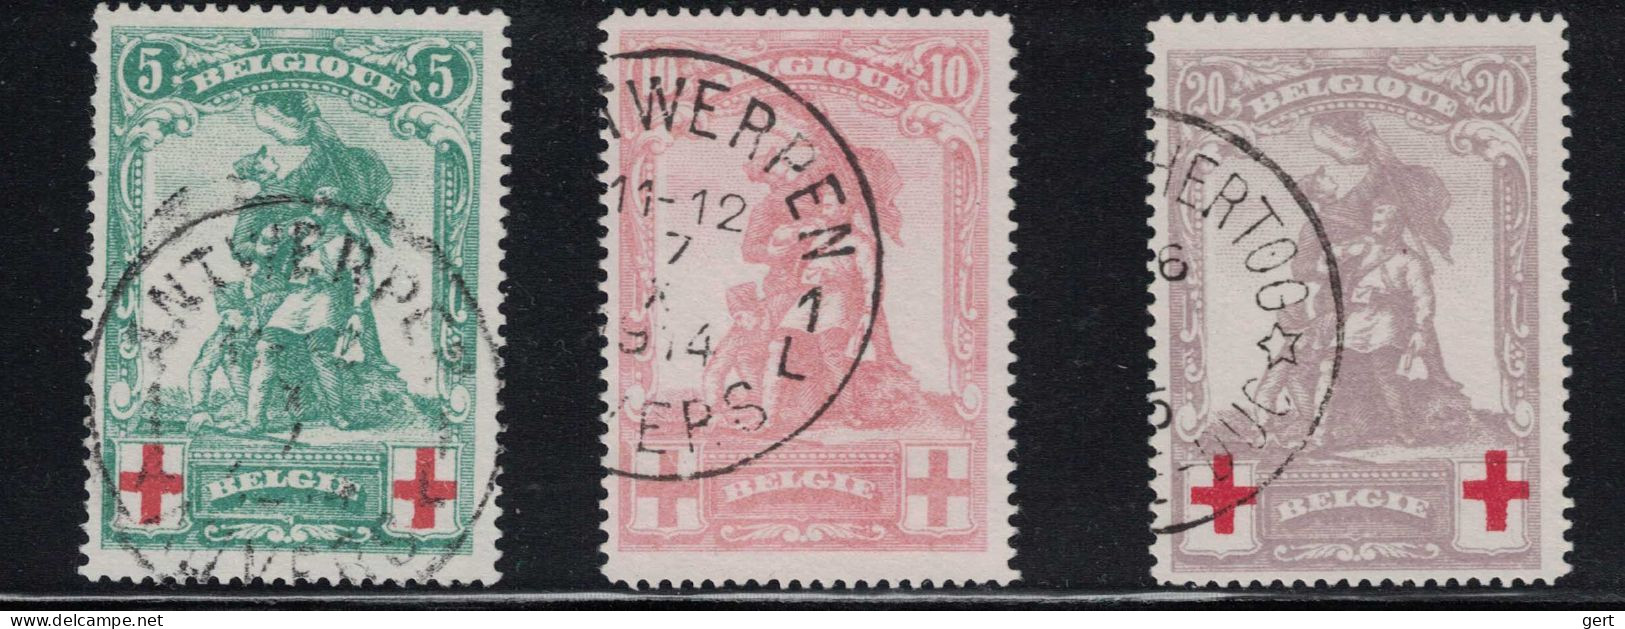 OBP / COB N° 126 - 128  O / Gestempeld / Oblitéré / Used VALS / FAUX / FAKE - 1914-1915 Red Cross